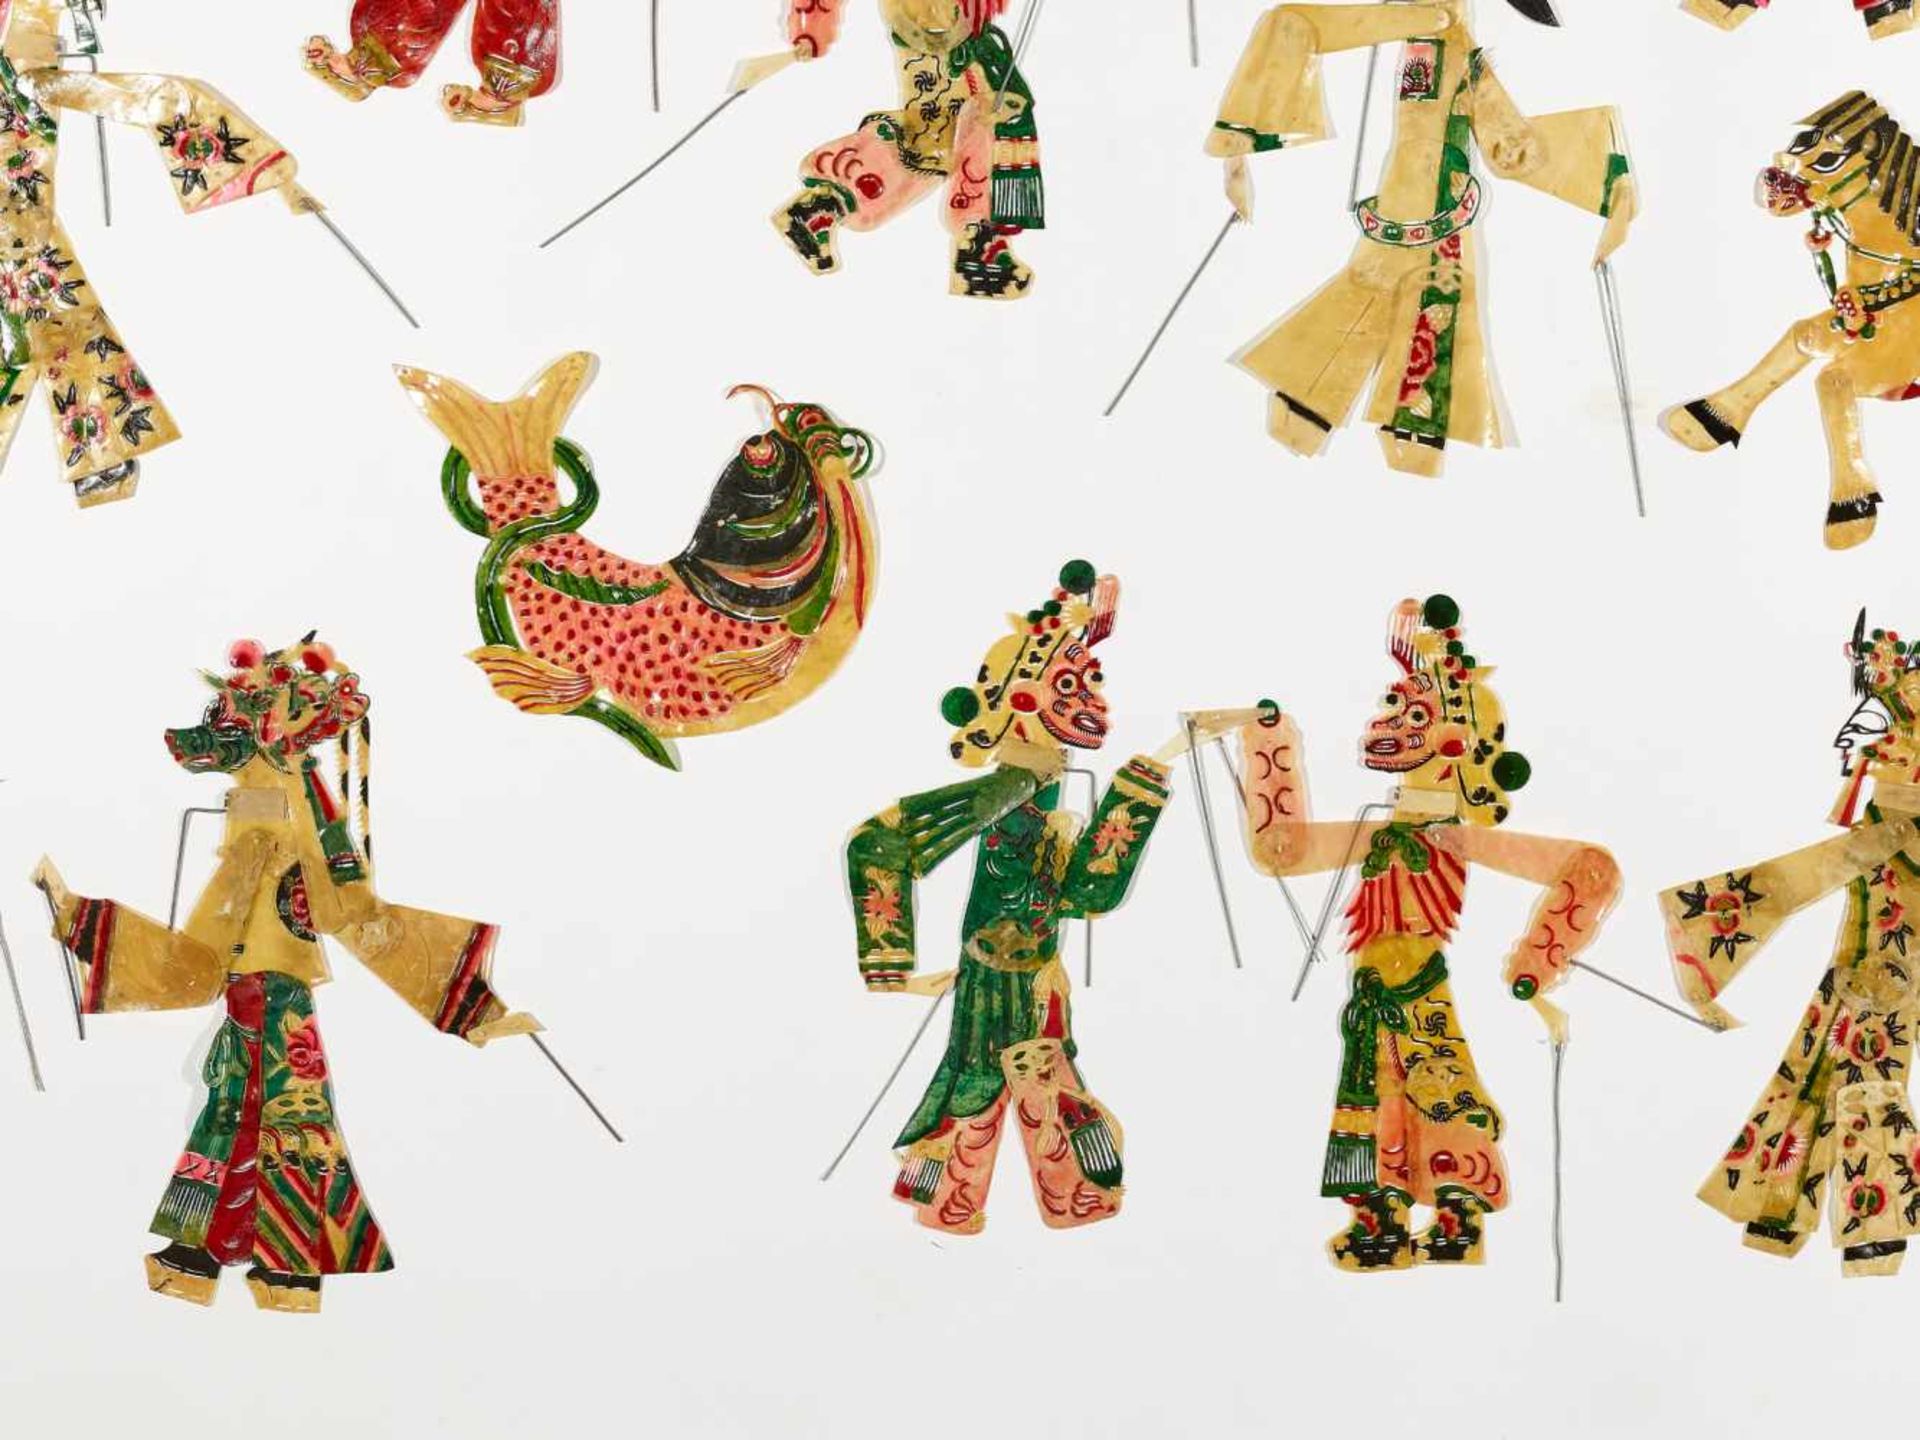 A SET WITH 21 HAND PAINTED CHINESE SHADOW PUPPETS, 1930sHand painted hide, small metal rodsChina, - Image 3 of 5